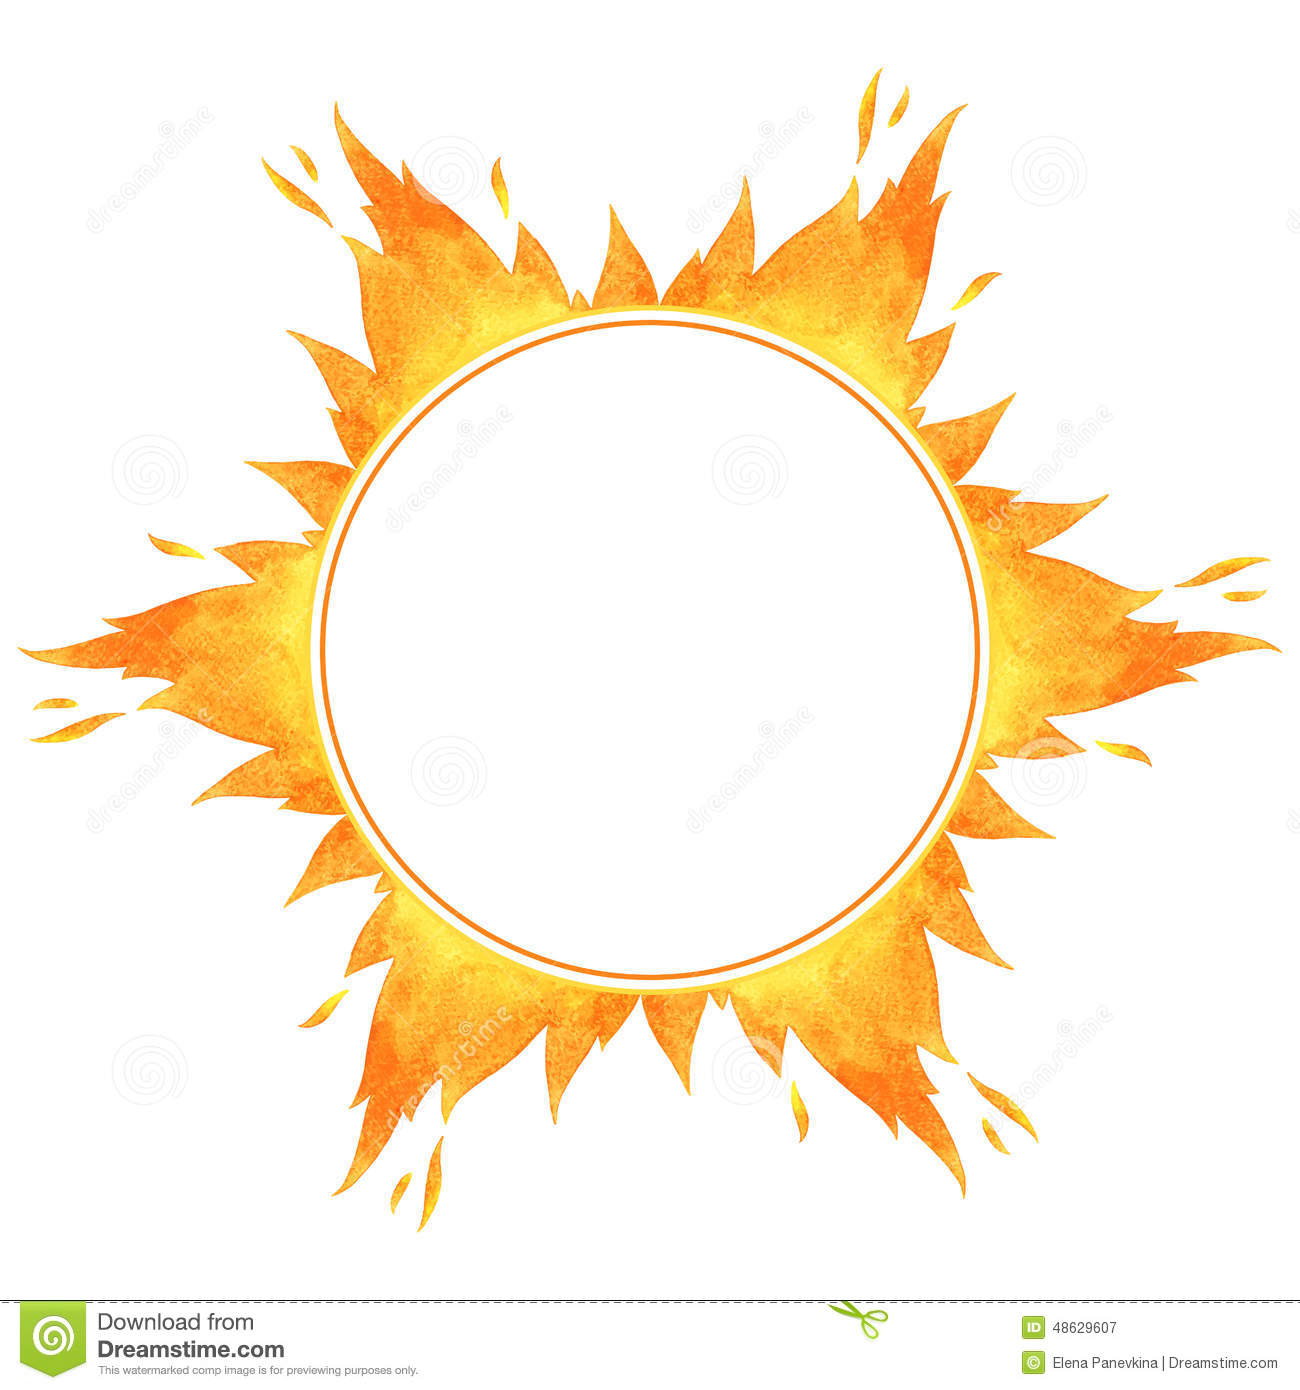 Fire Flames in Circle Border